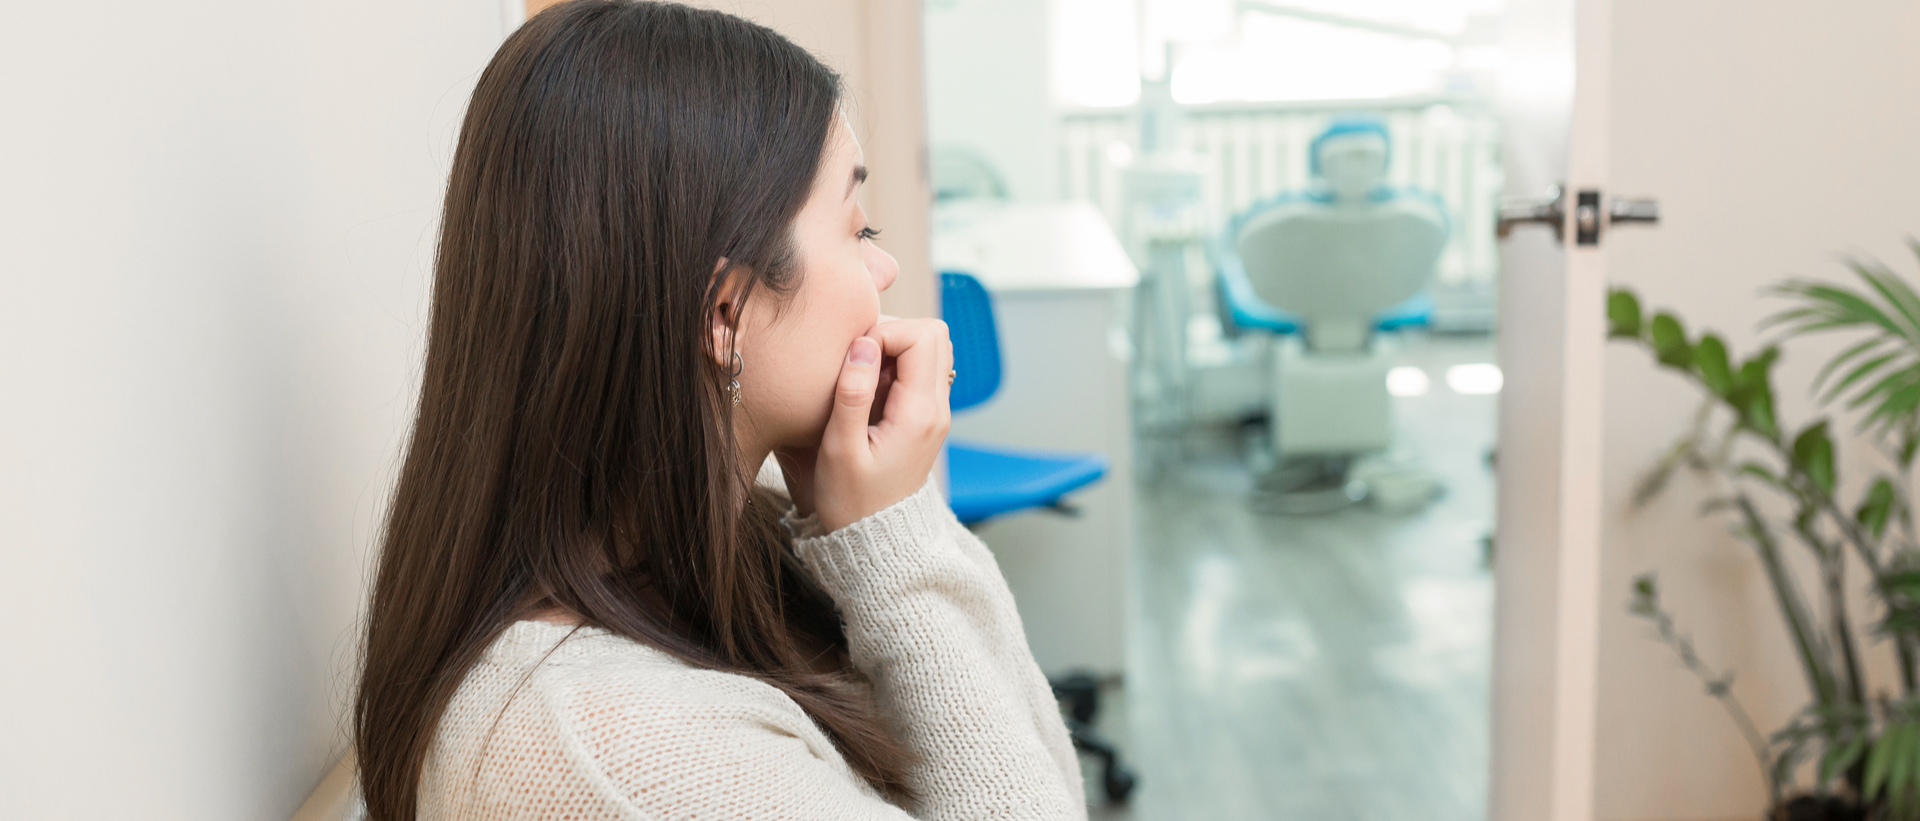 Finnish dental fear clinic aims to put an end to dental anxiety